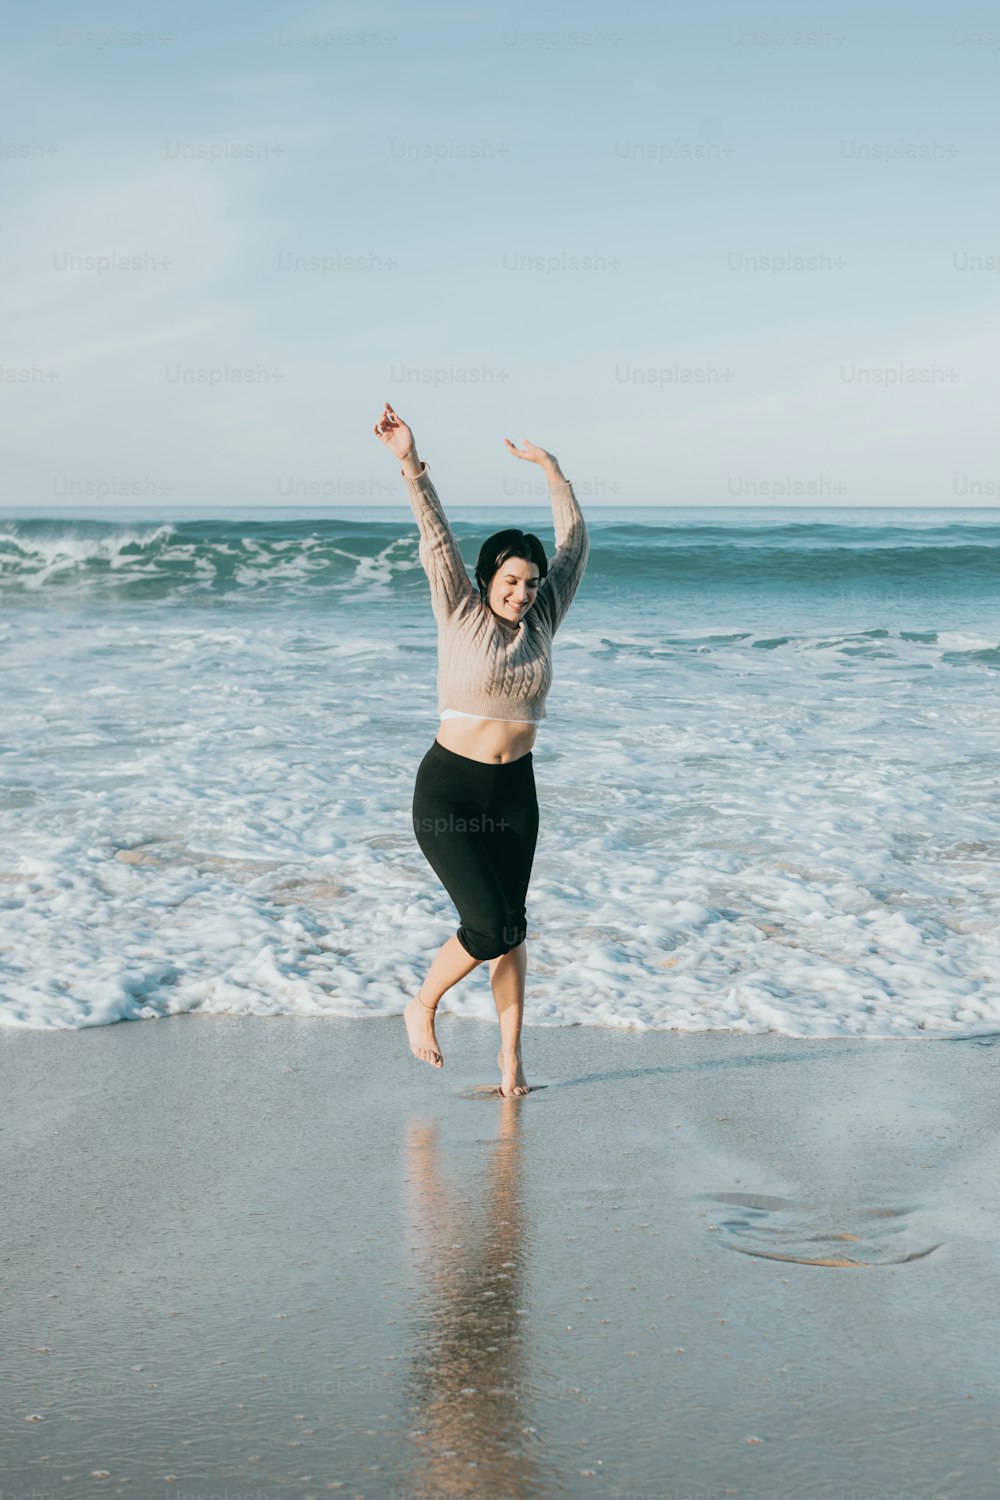 a woman jumping on the beach in front of the ocean